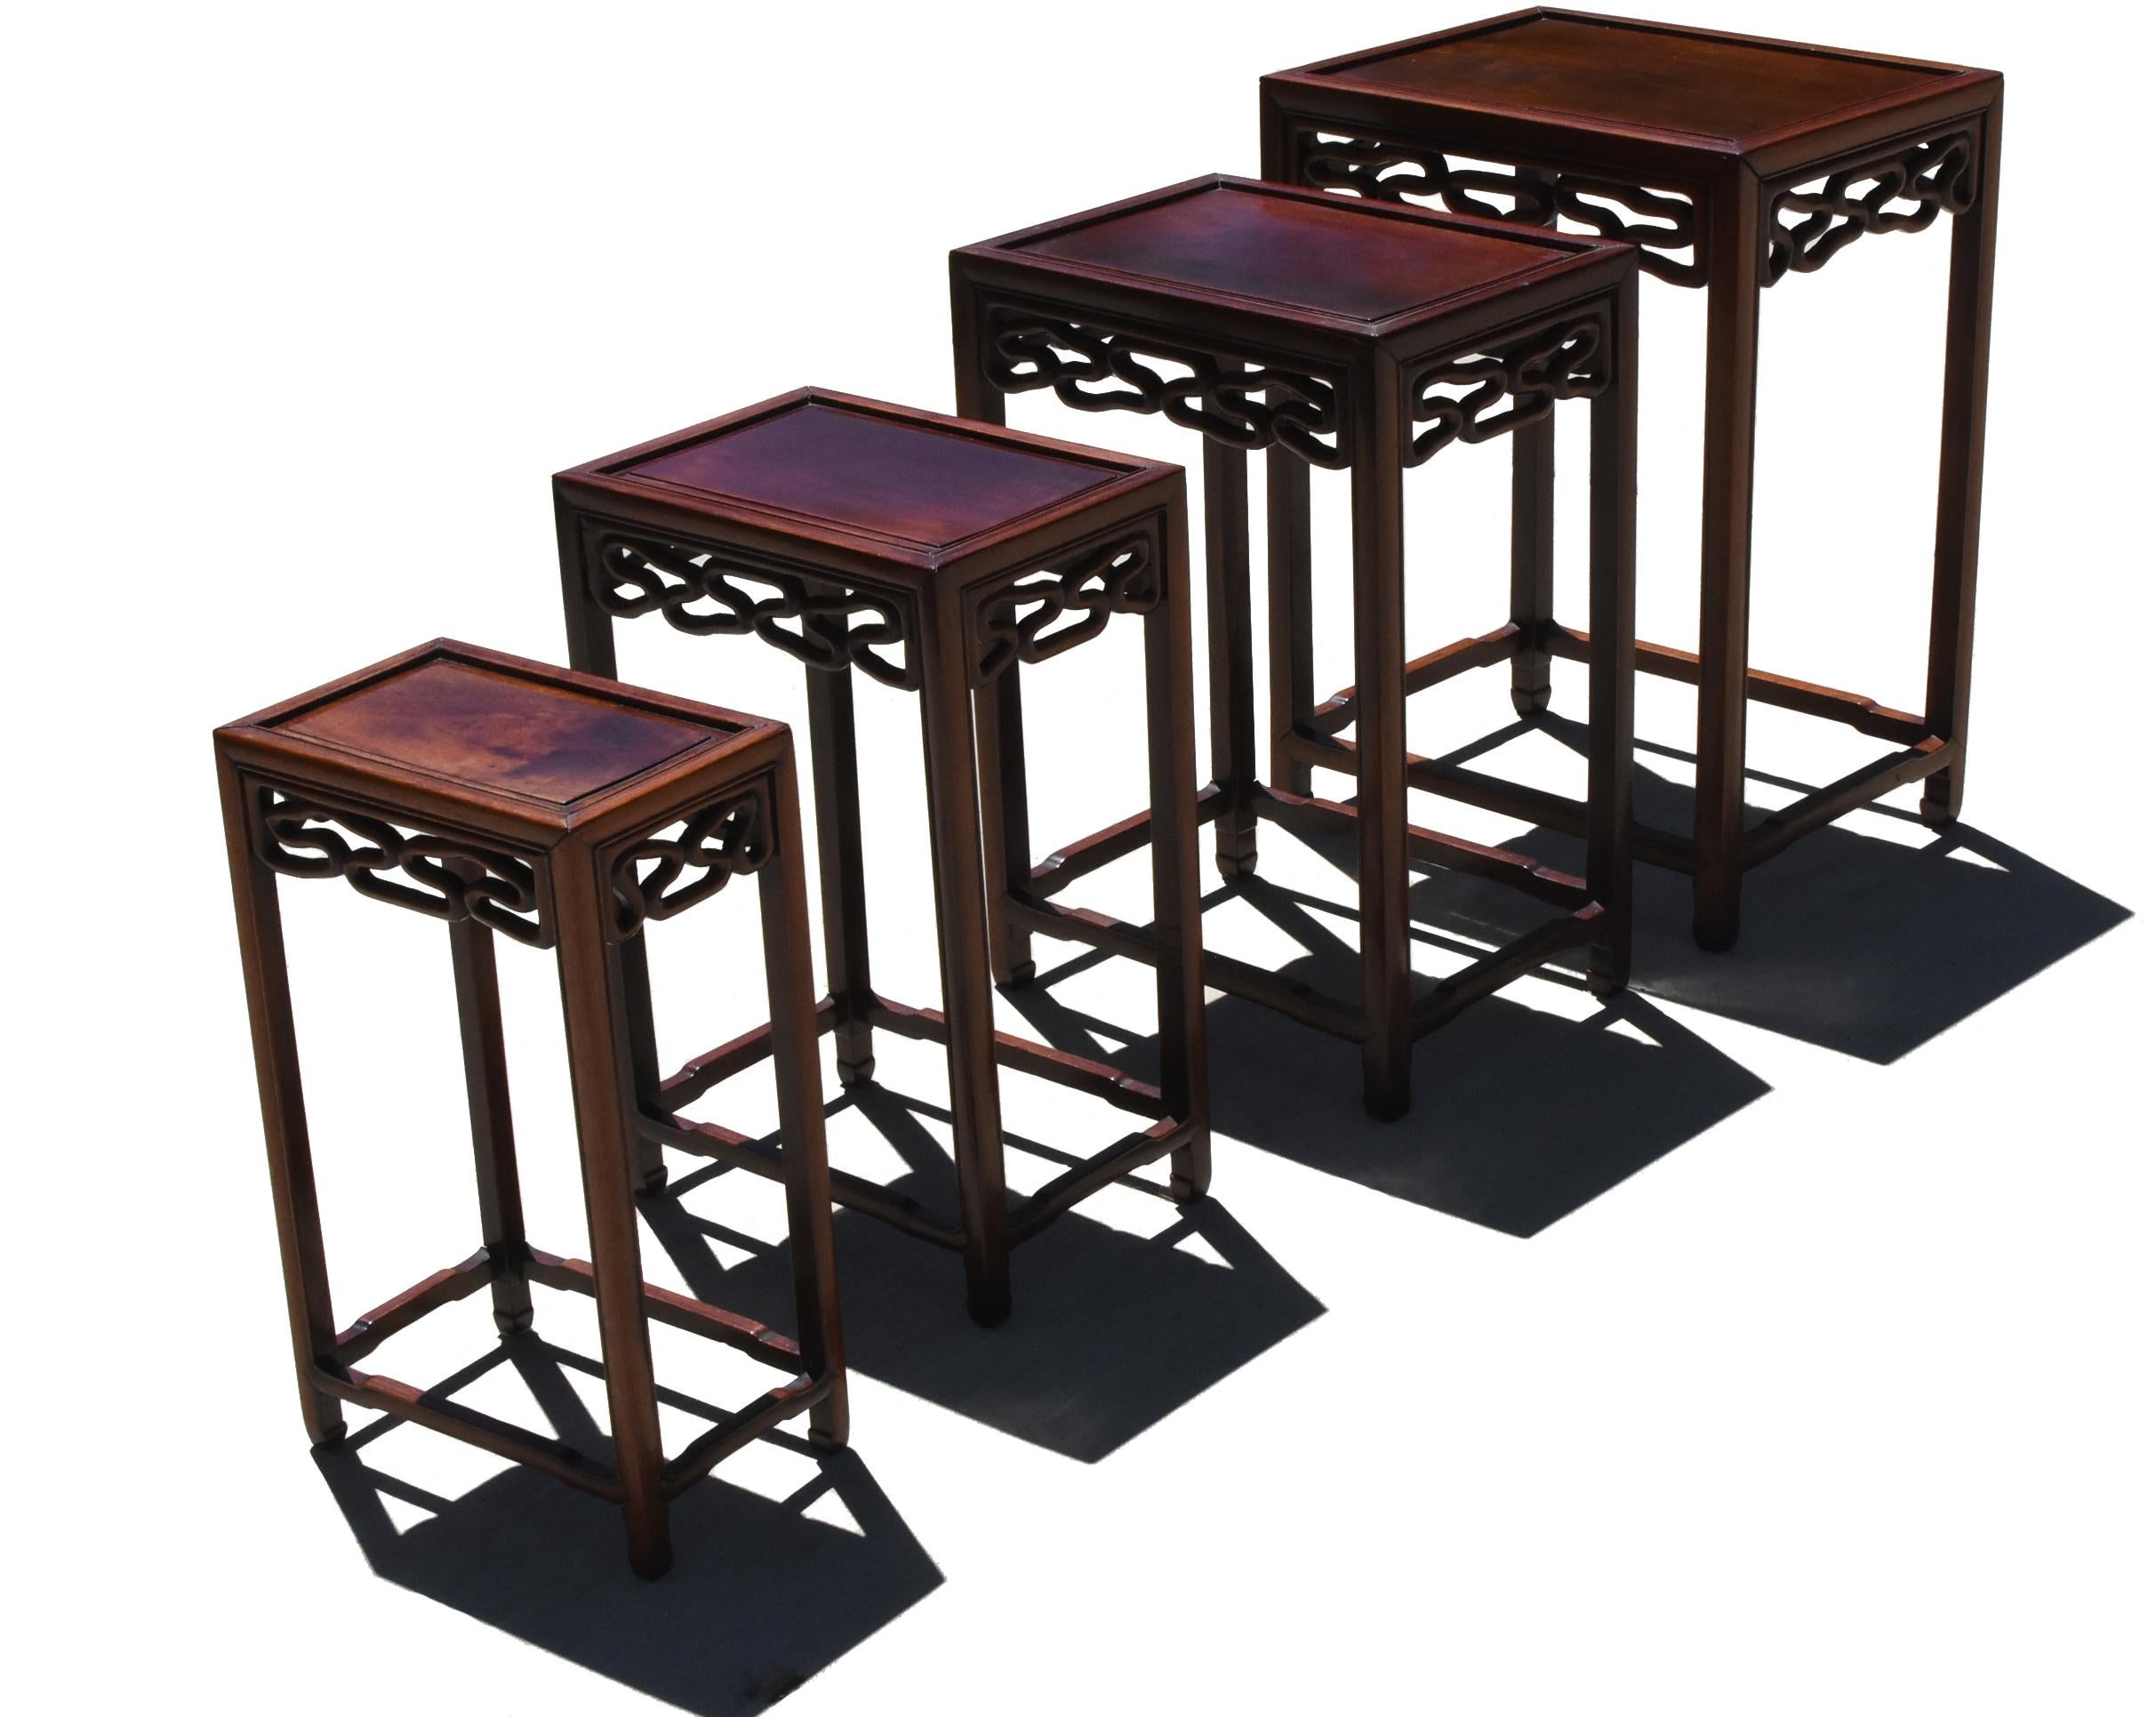 Our Chinese nesting tables are very elegant and versatile. Each and every table is a complete piece on its own, unlike most other sets with one of the stretchers removed to accommodate 